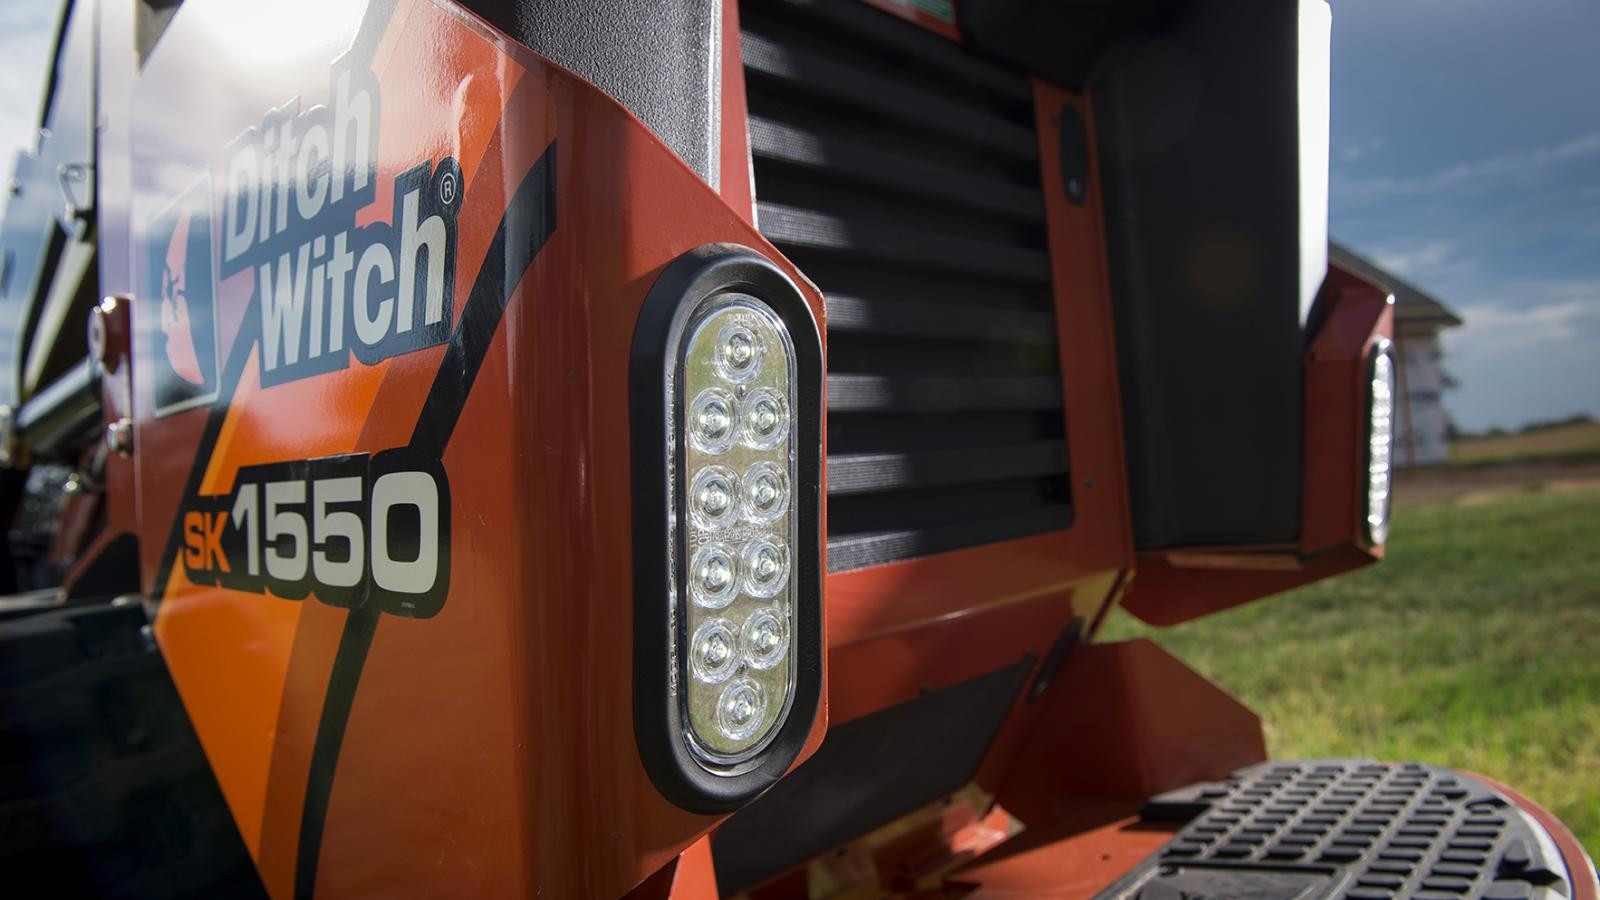 Ditch Witch 3700 Starter Wiring Diagram New Ditch Witch Sk1550 Mini Skid Steer Ditch Witch West Equipment Of Ditch Witch 3700 Starter Wiring Diagram